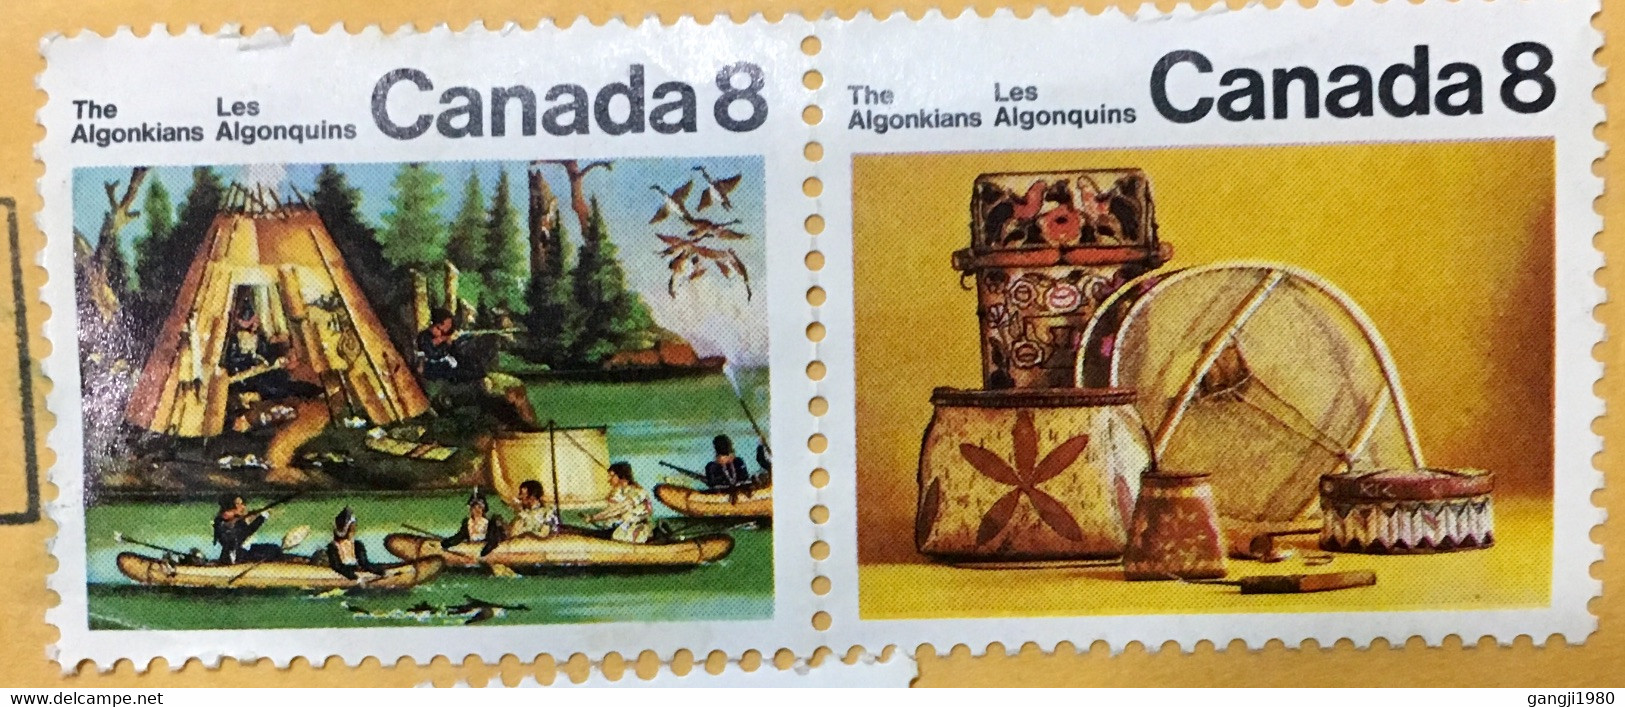 CANADA 2008, COVER 31 STAMPS ALL WITHOUT CANCELLATION ,BOOKLET PANE ,BLOCK ,FLOWER SHIP ,AEROPLANE ,CHIRSTMAS ,BOAT RACE - Briefe U. Dokumente